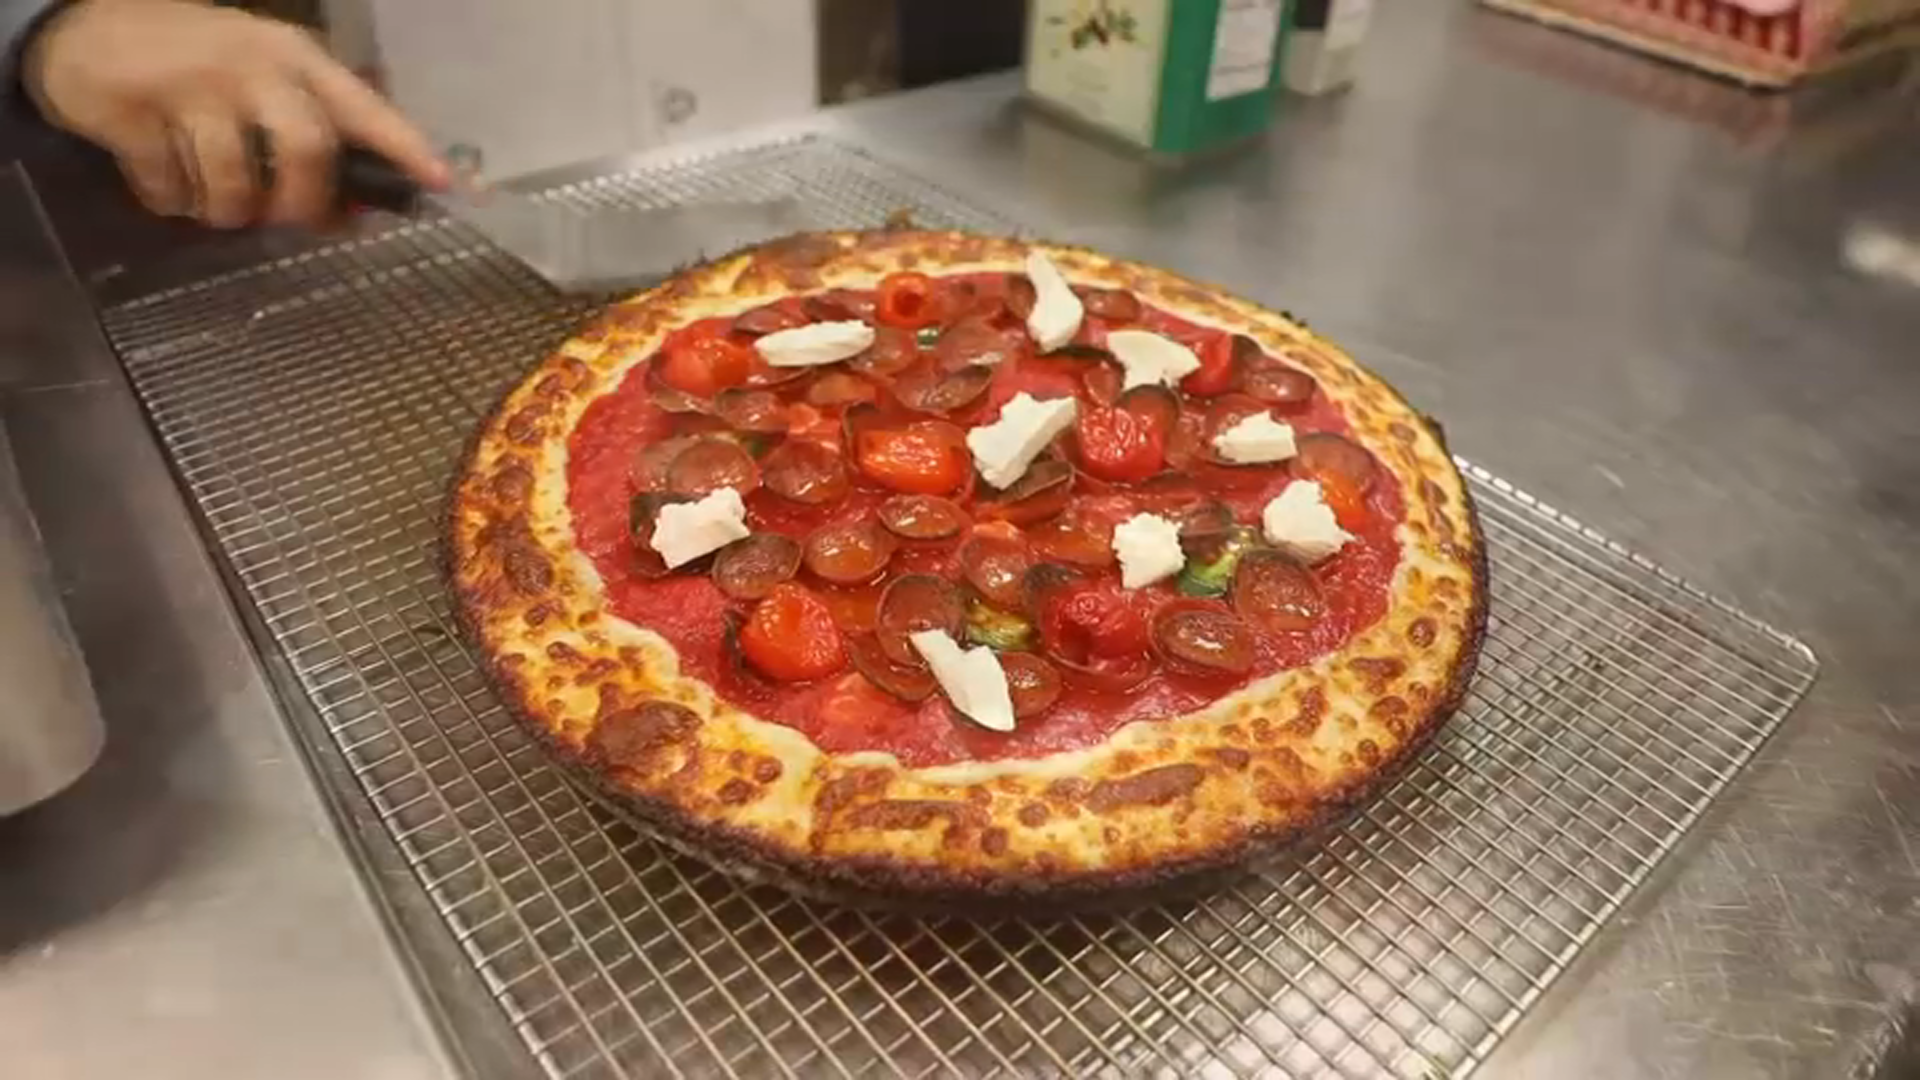 https://media.nbcchicago.com/2023/02/deep-pan-pizza.png?fit=1920%2C1080&quality=85&strip=all